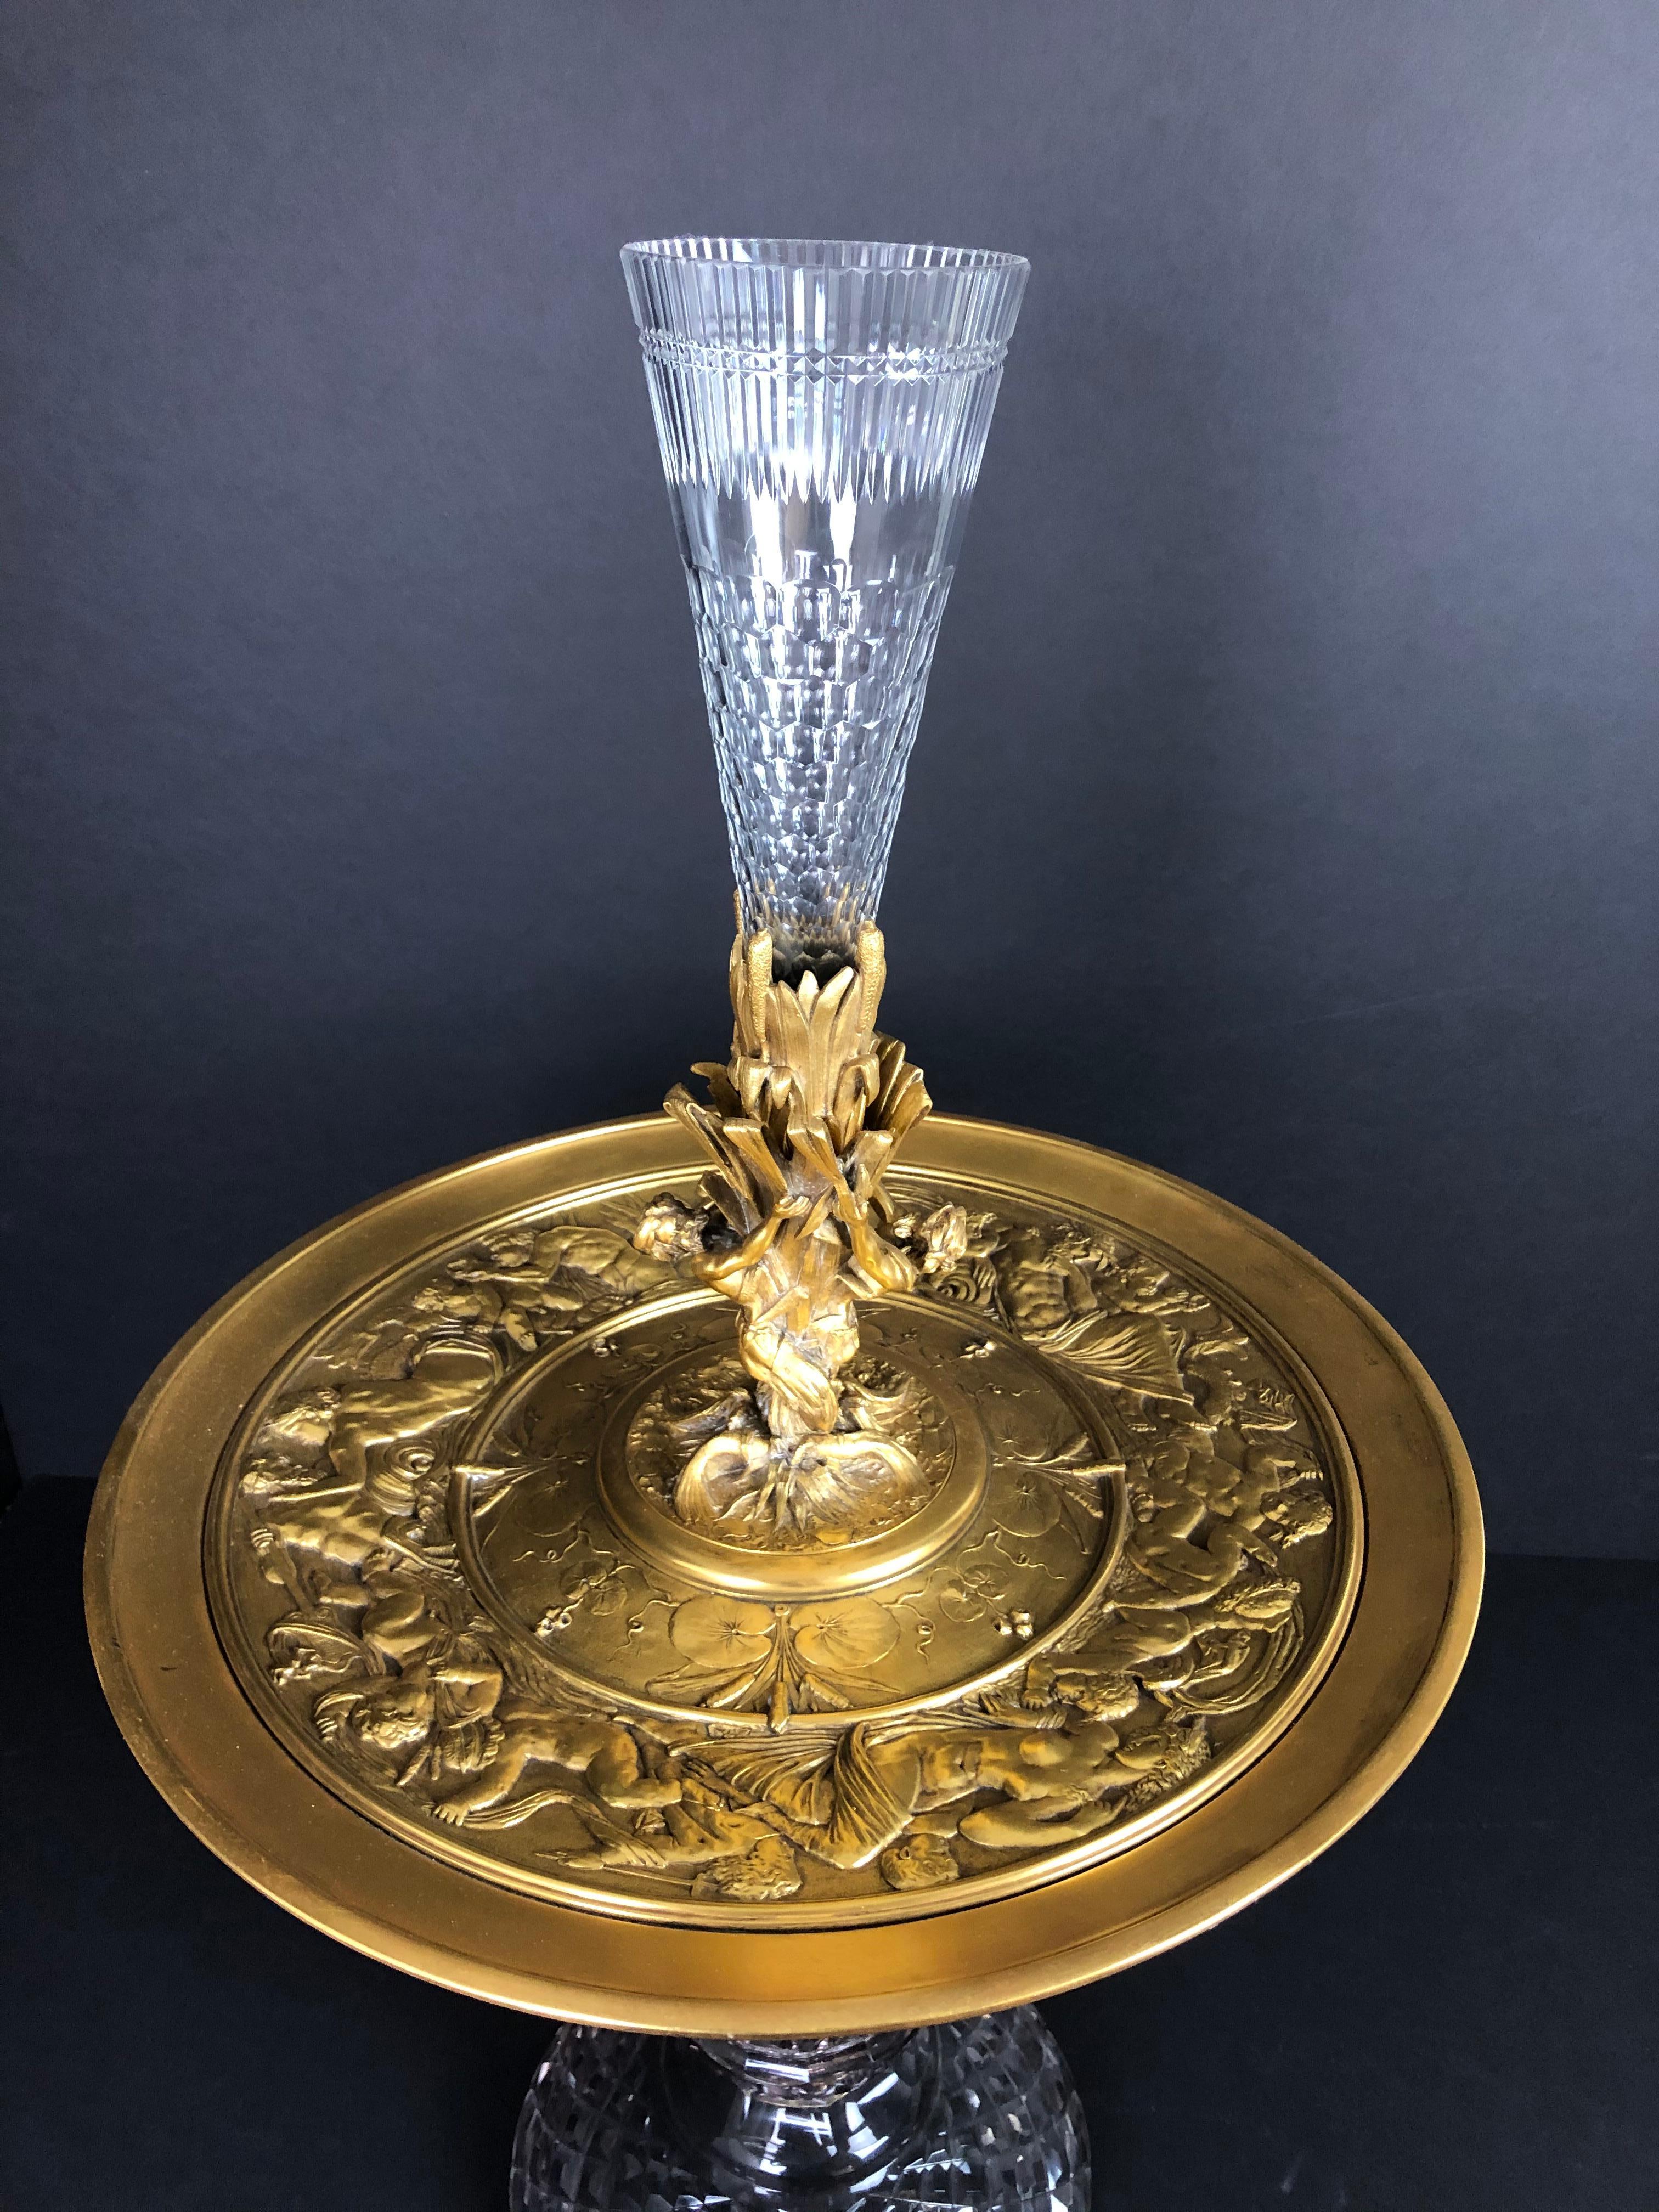 Centerpiece epergne of gilt bronze and crystal. Gilt figural bronze mounted Baccarat crystal centerpiece. Triton figures and sea grass supporting crystal flute. Gilt bronze tazza form charger dish with mythological figures throughout.
Base width